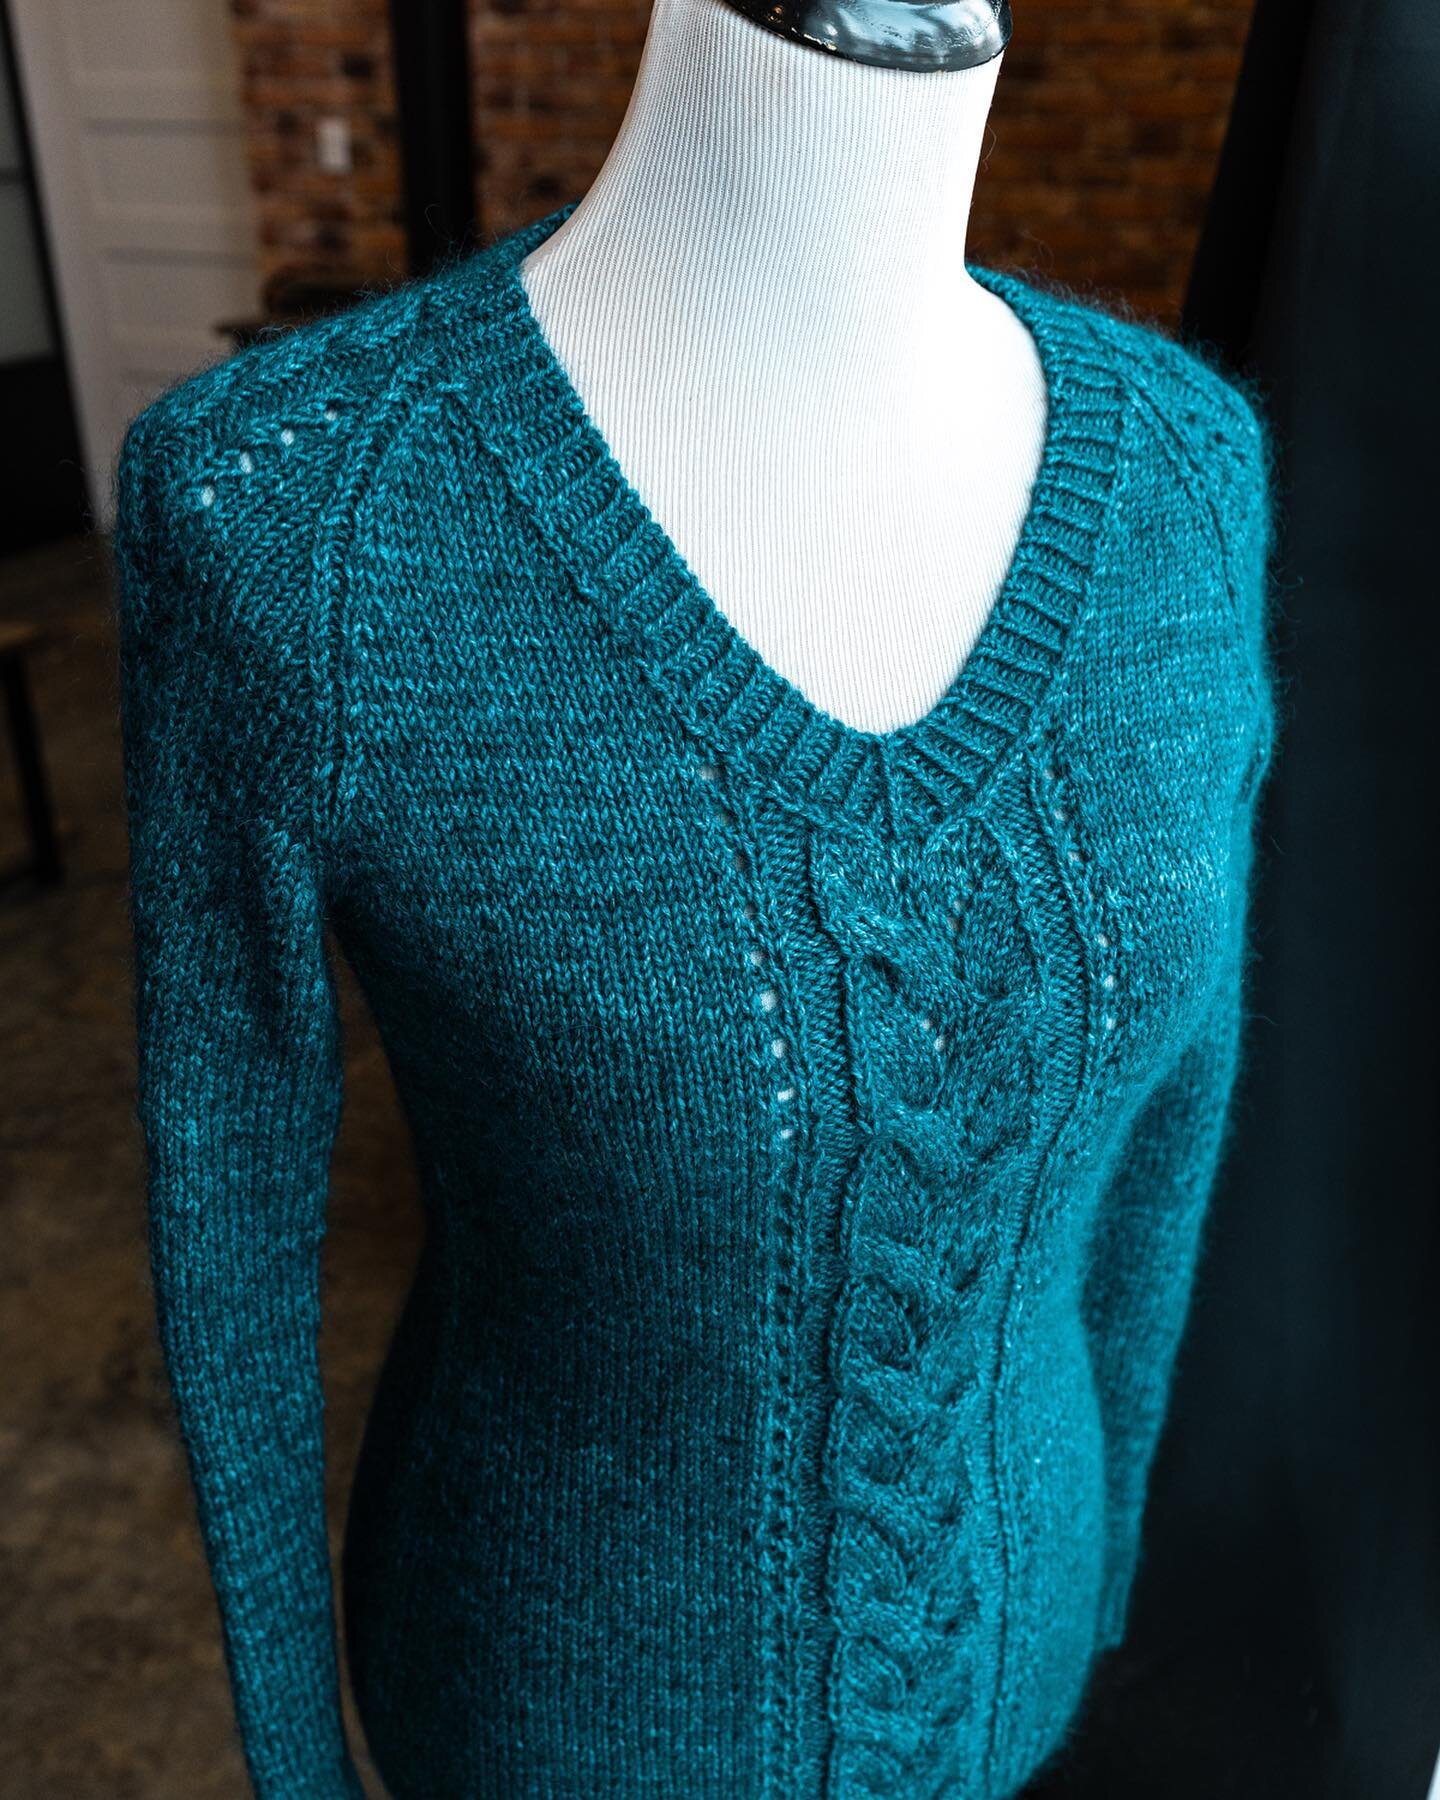 ✨ TEST KNITTING CALL ✨ I am looking for test knitters for a new, #sizeinclusive pullover pattern that features a classic V neckline, raglan shaping, and cable and lace details. It&rsquo;s knit from the bottom-up (don&rsquo;t scroll away! 😅) using ei